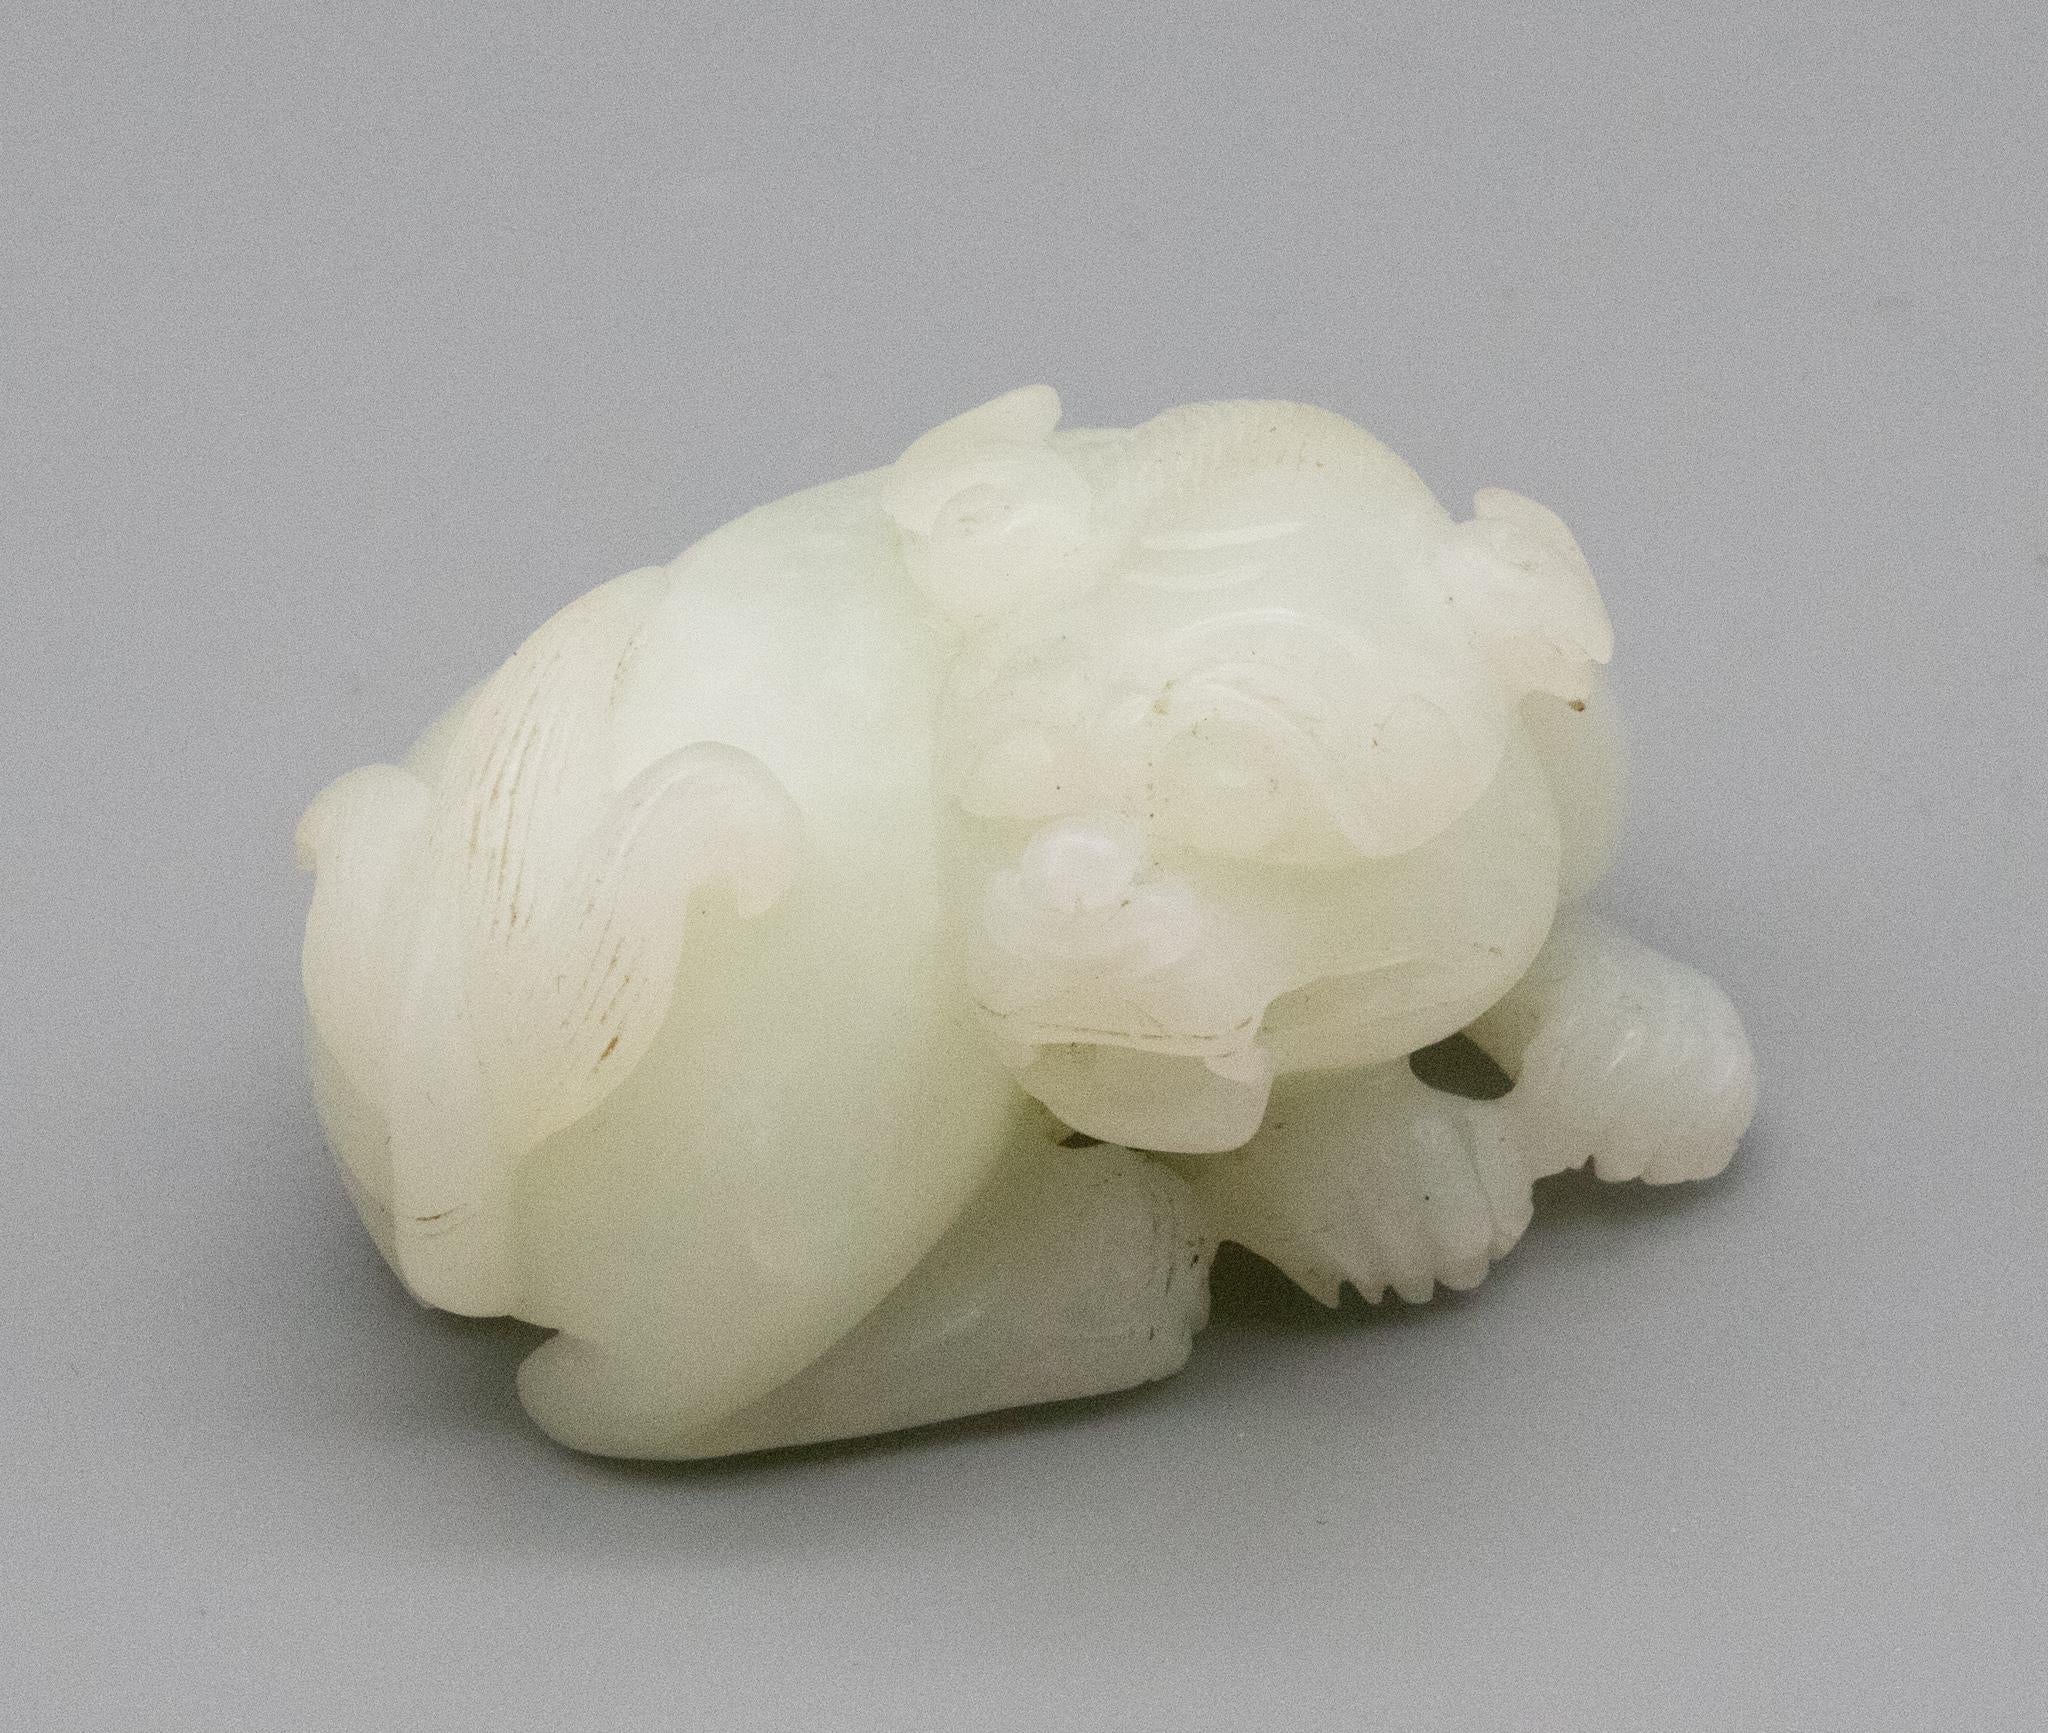 China Qing Dynasty 18th Century Reclining Foo Dog Carved in White Nephrite Jade 5